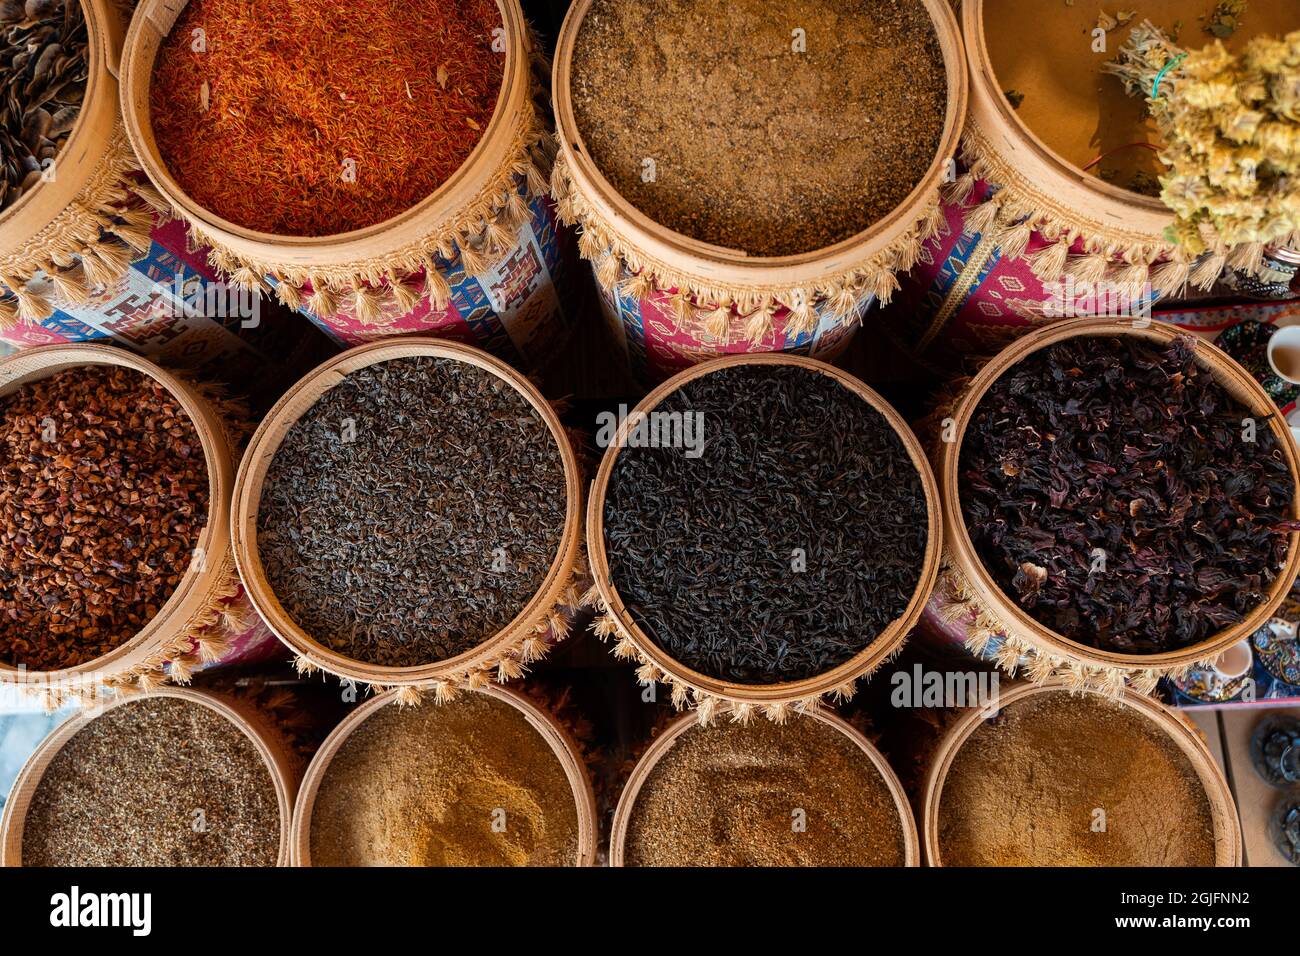 https://c8.alamy.com/comp/2GJFNN2/assortment-of-turkish-spices-and-herbs-in-wooden-bowls-turkish-market-spices-such-as-saffron-sumac-and-thyme-cumin-rosemary-and-isot-2GJFNN2.jpg